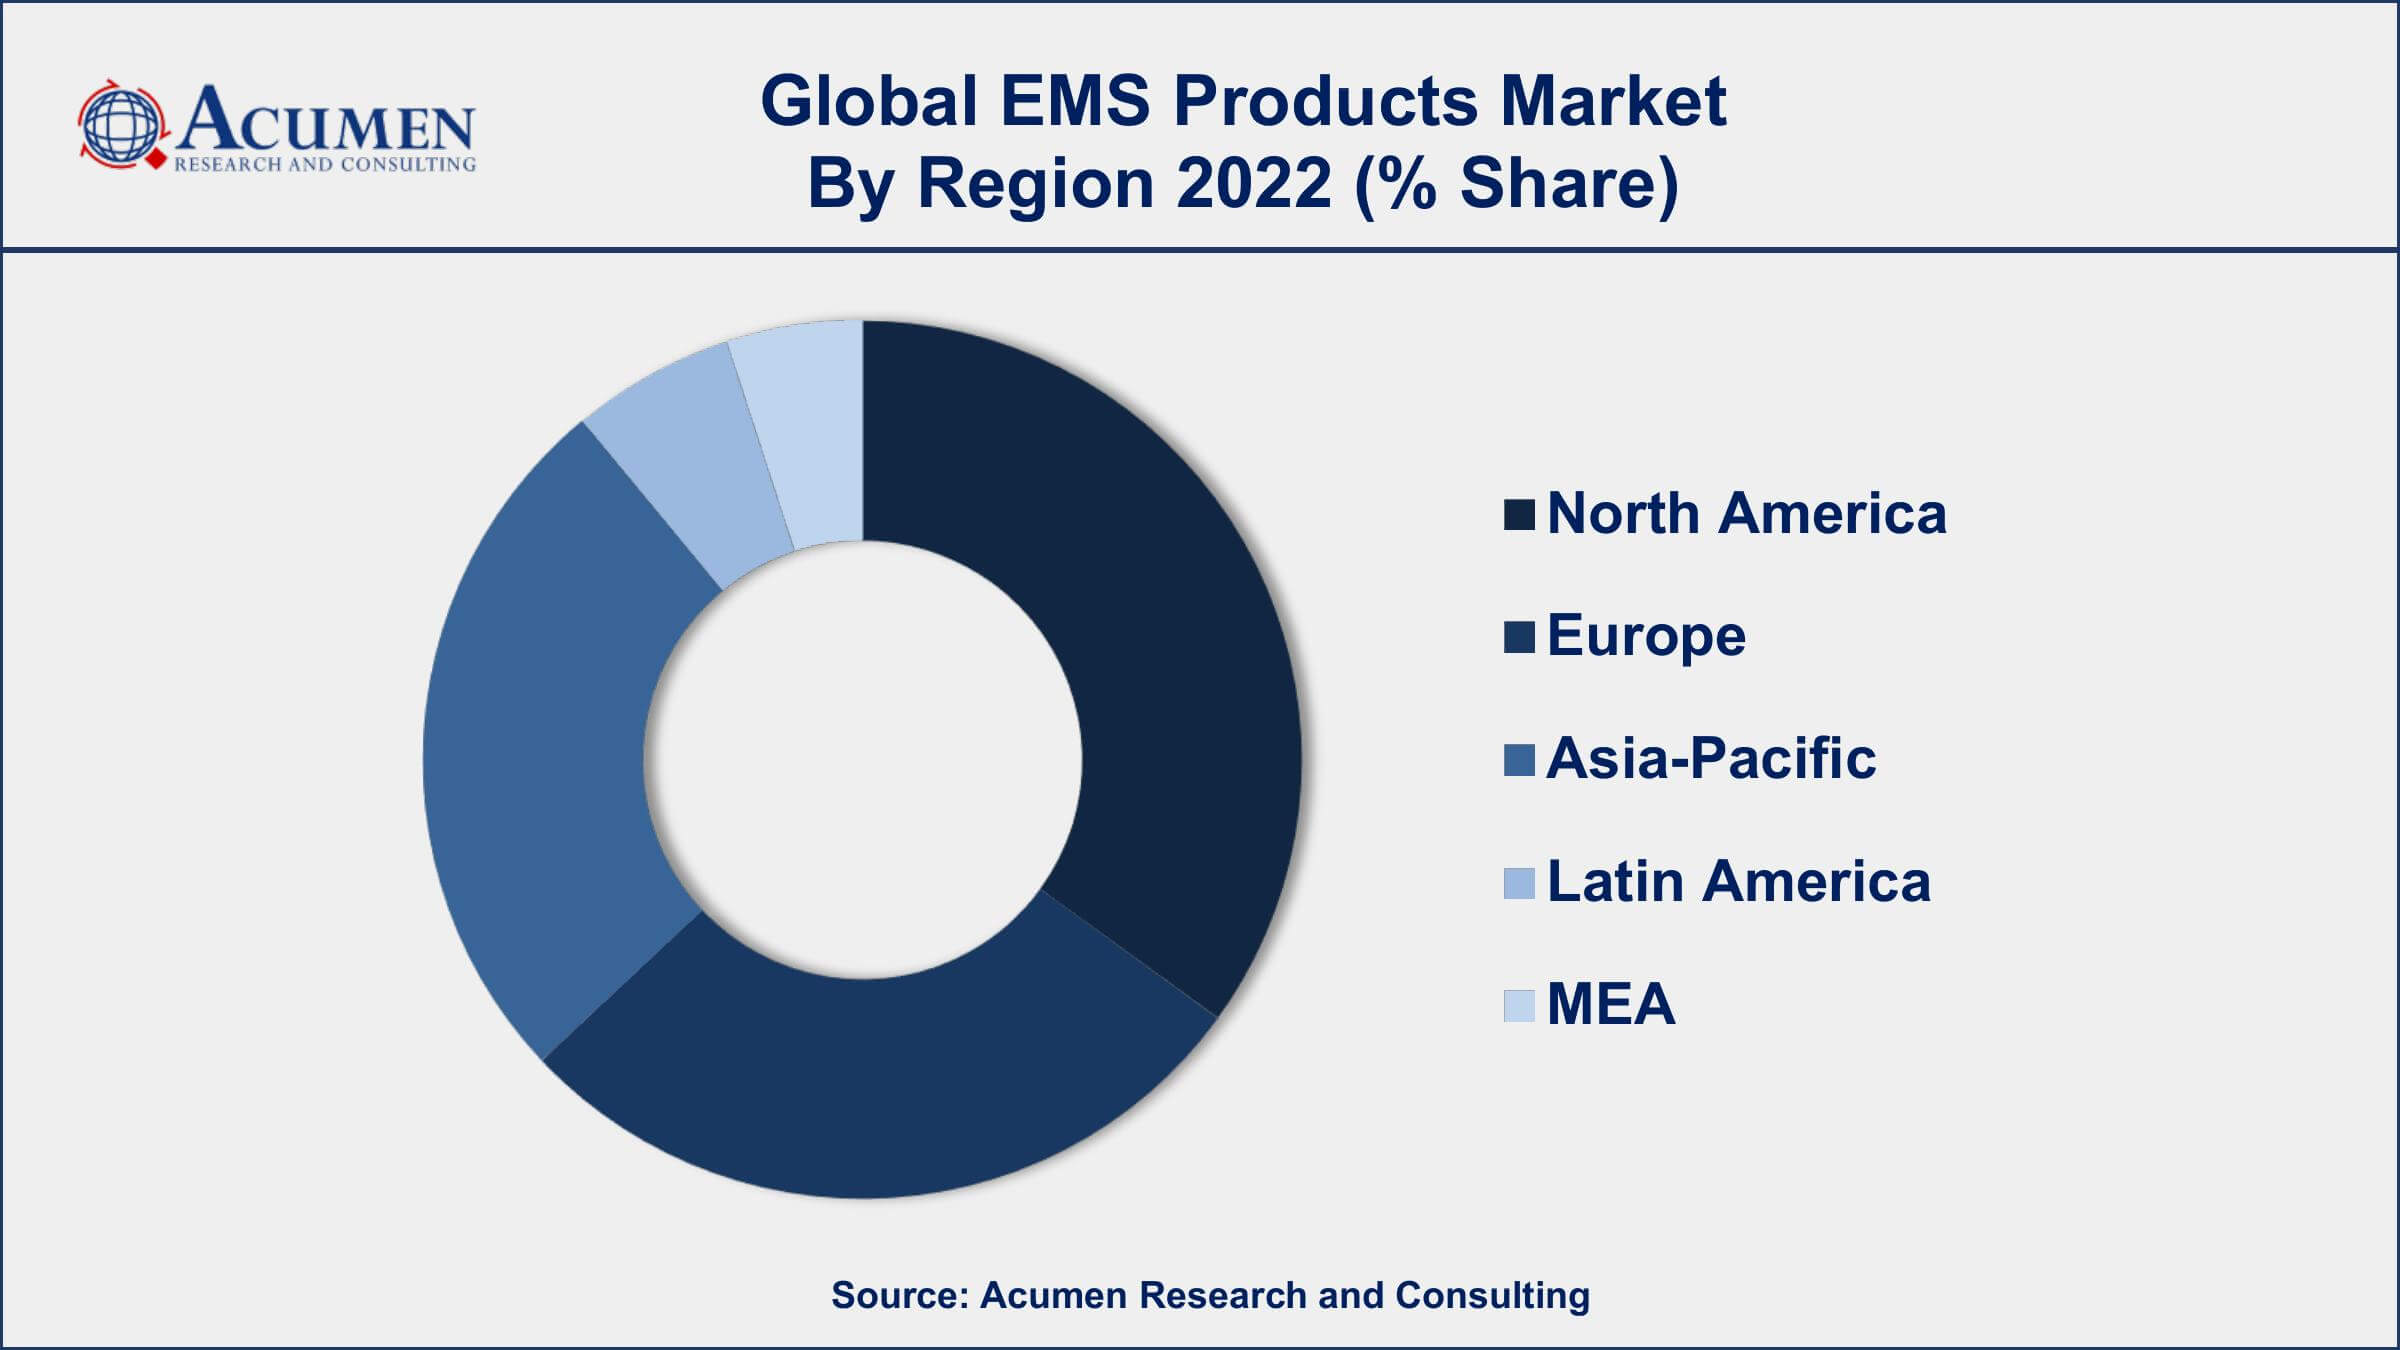 Emergency Medical Service Product Market Drivers